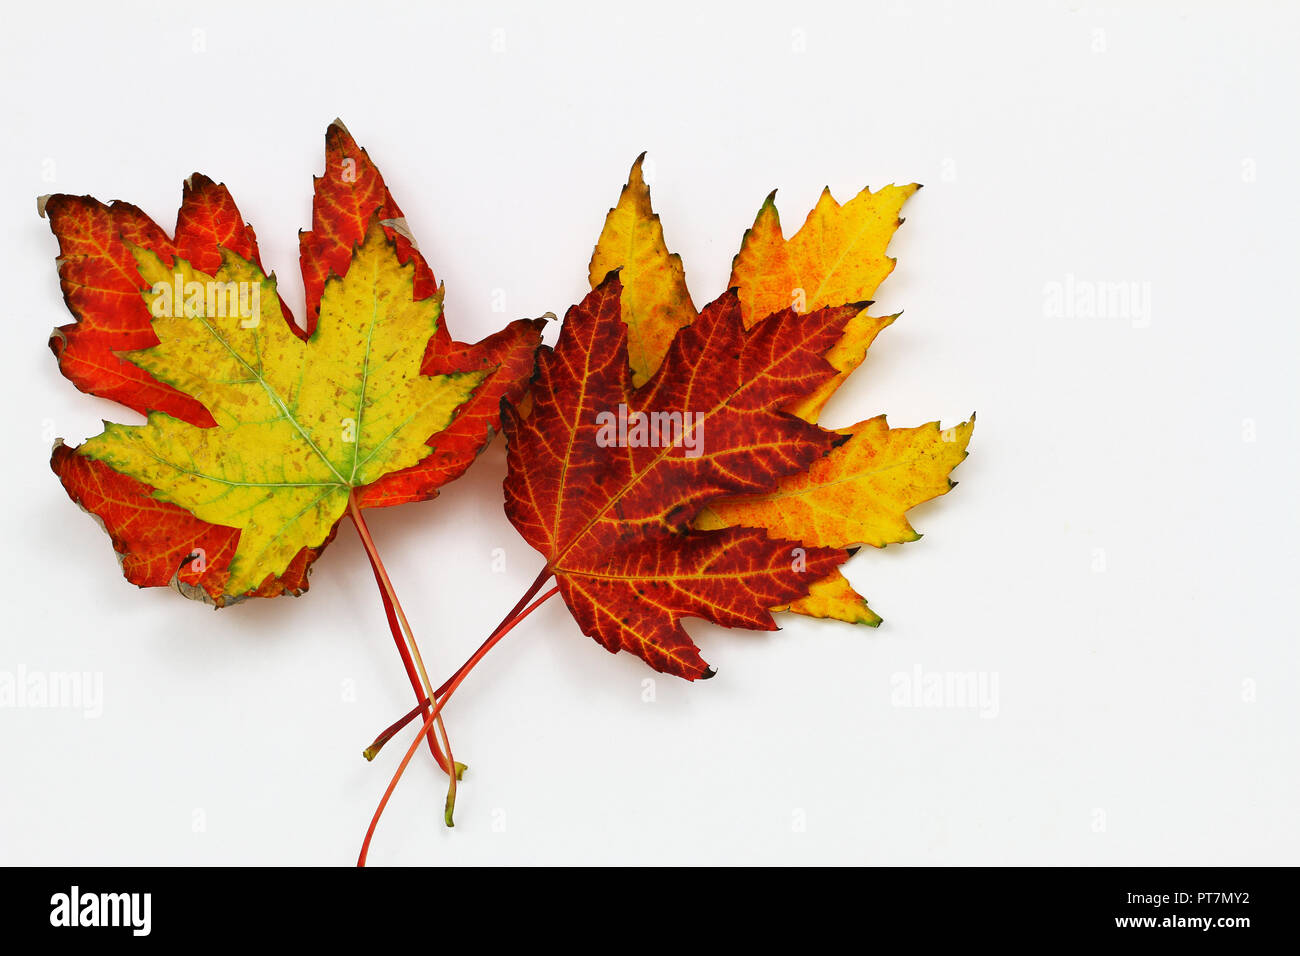 Colorful autumn maple leaves on white background with copy space Stock Photo